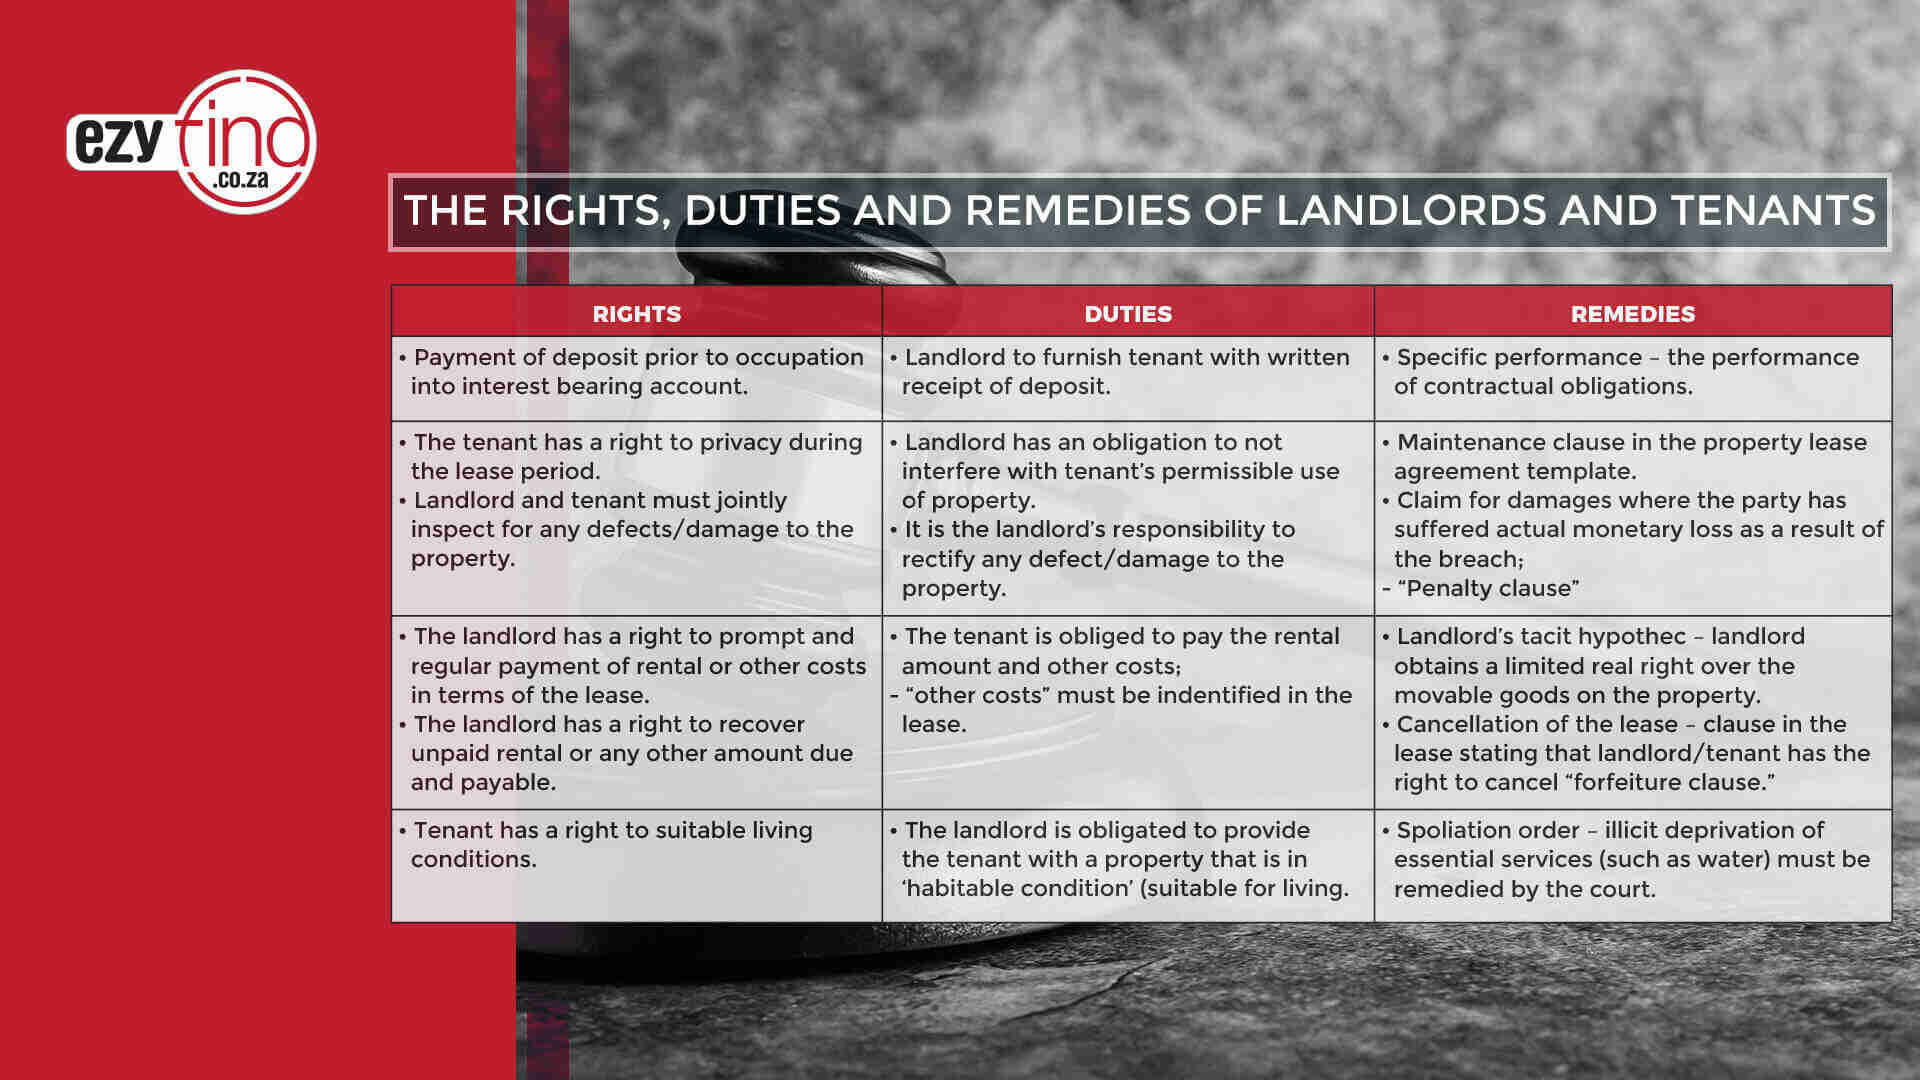 The rights, duties and remedies of landlords and tenants